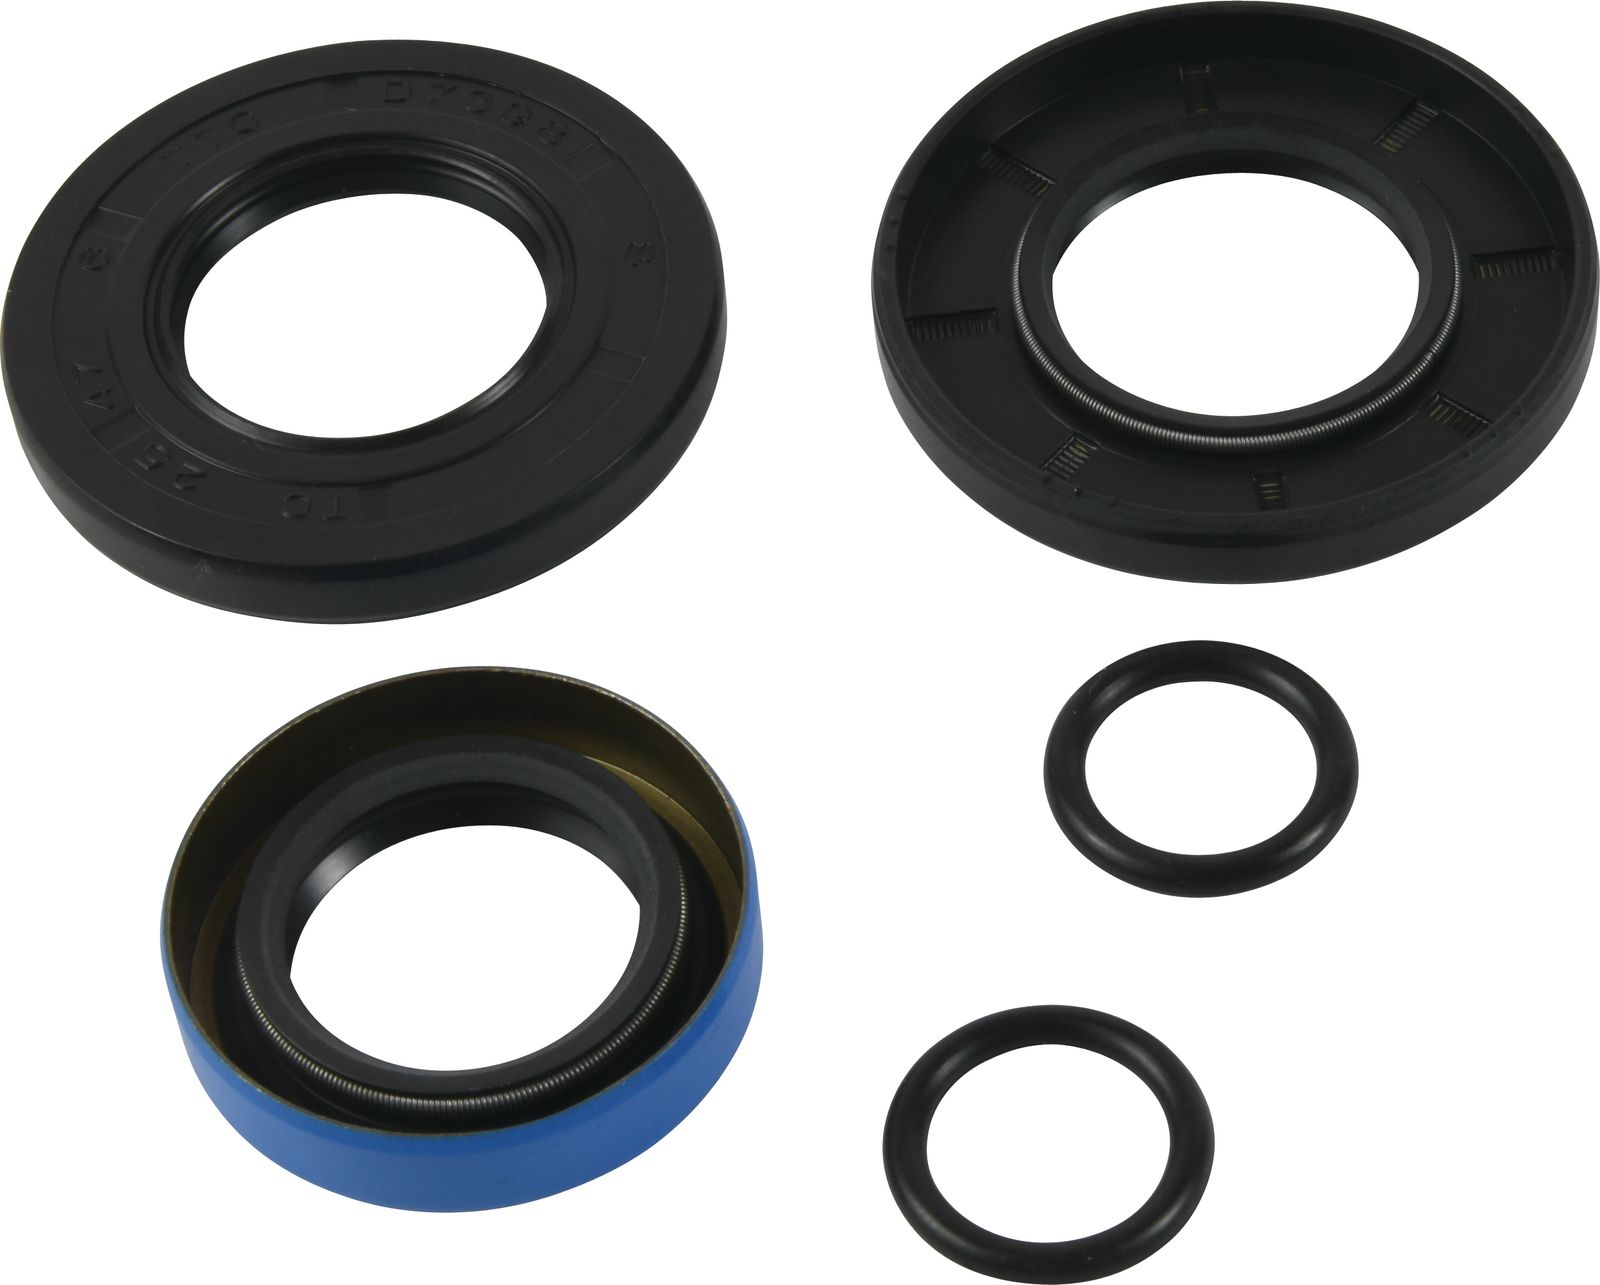 Wrp Diff Seal Kits - WRP252128-5 image